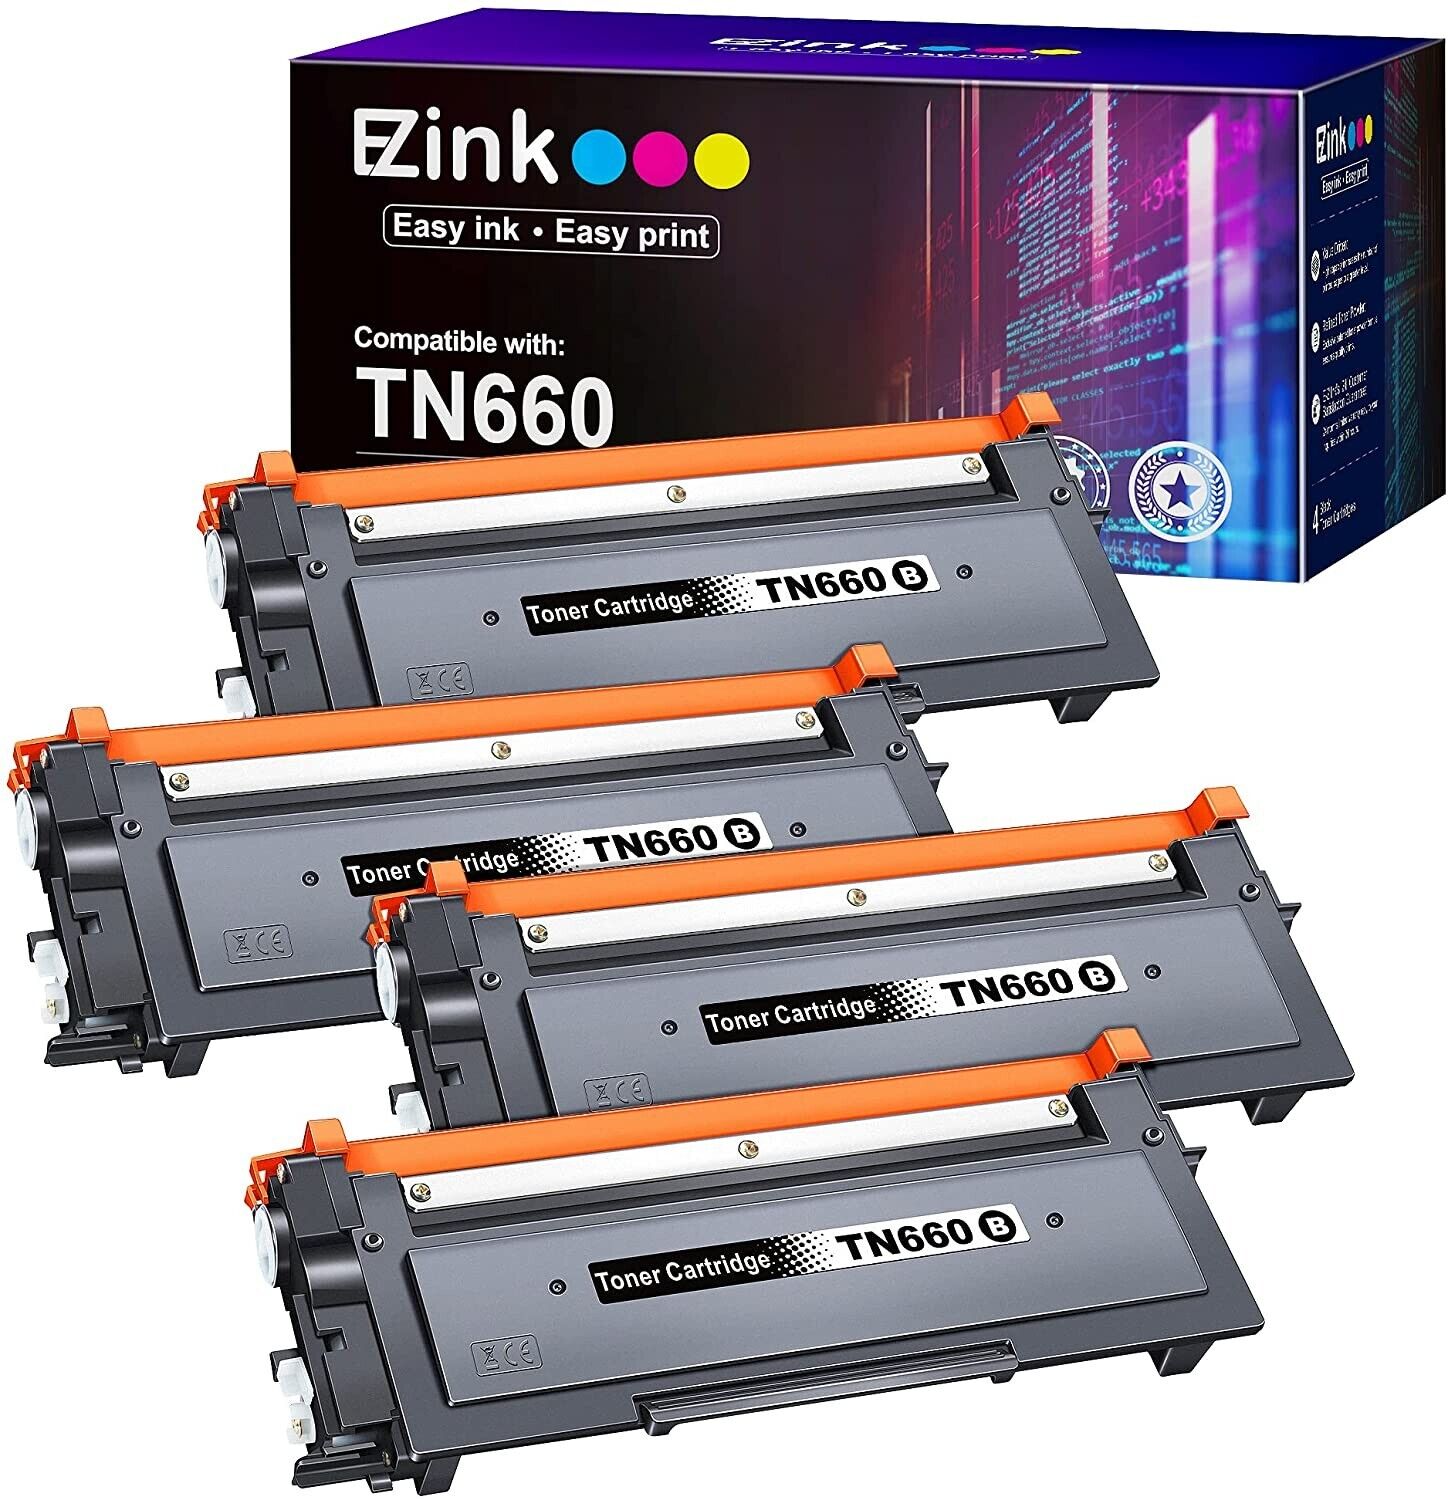 E-Z Ink Premium Toner Cartridge Replacement for Brother TN660 TN630 Exp.Dec 2024